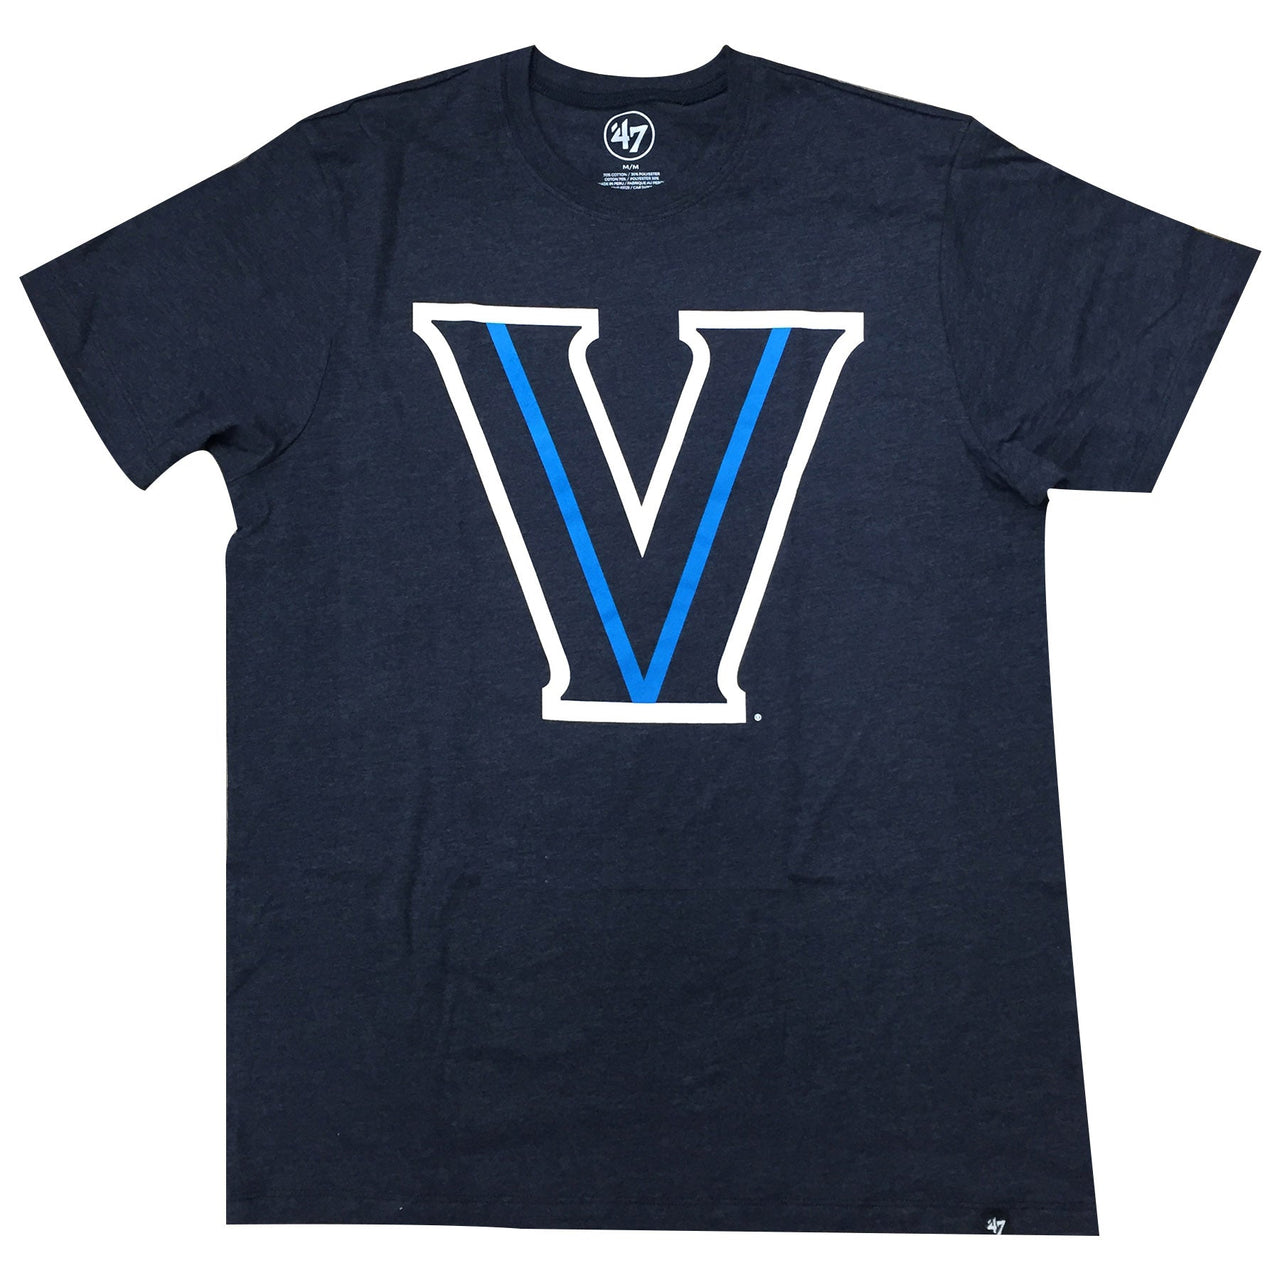 the navy blue and heather villanova t-shirt is navy blue with a villanova logo printed in light blue and white